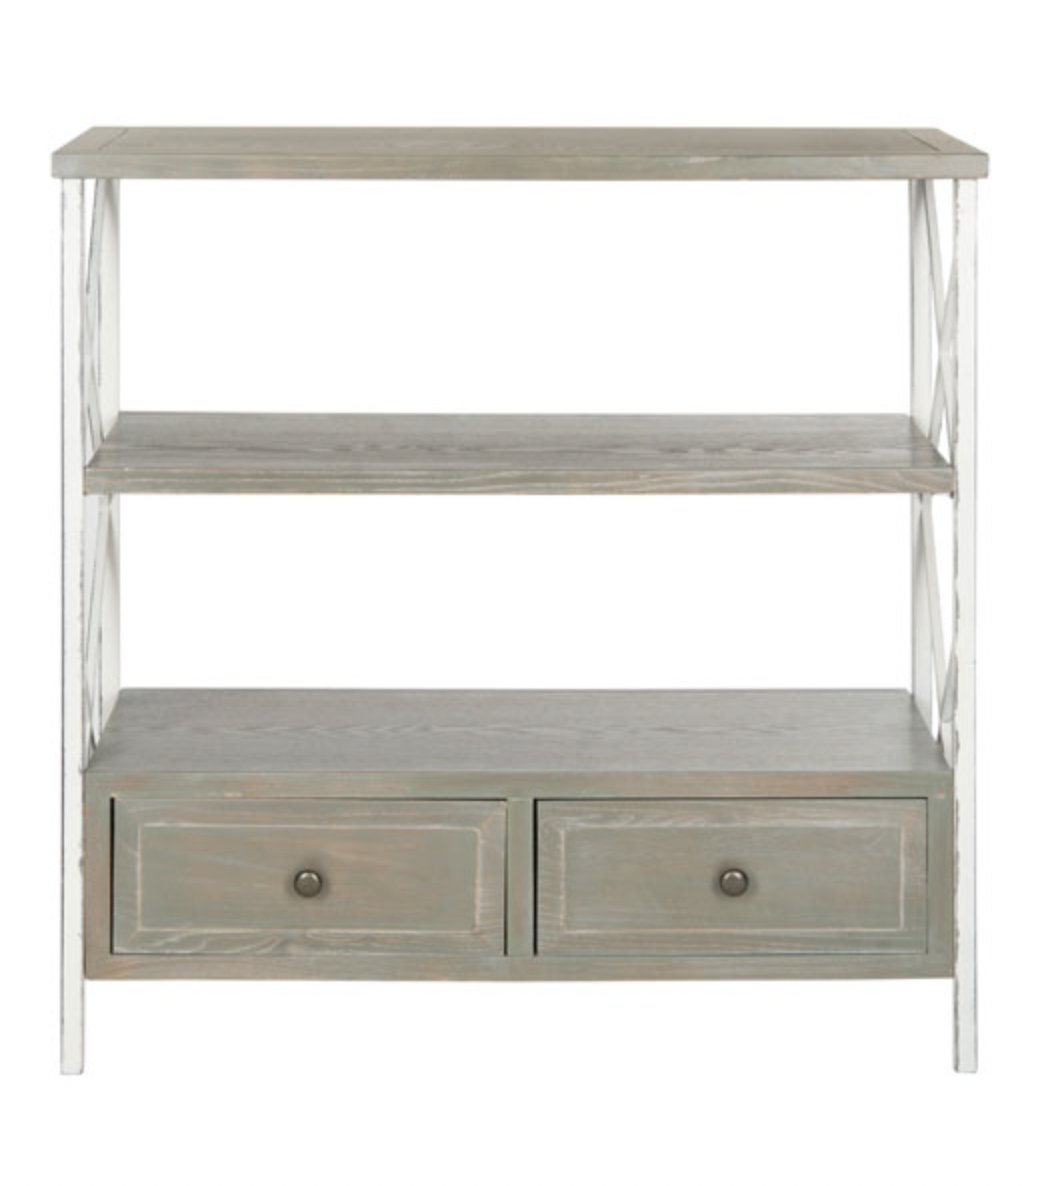 Chandra Console With Storage Drawers - French Grey/White Smoke - Arlo Home - Image 0